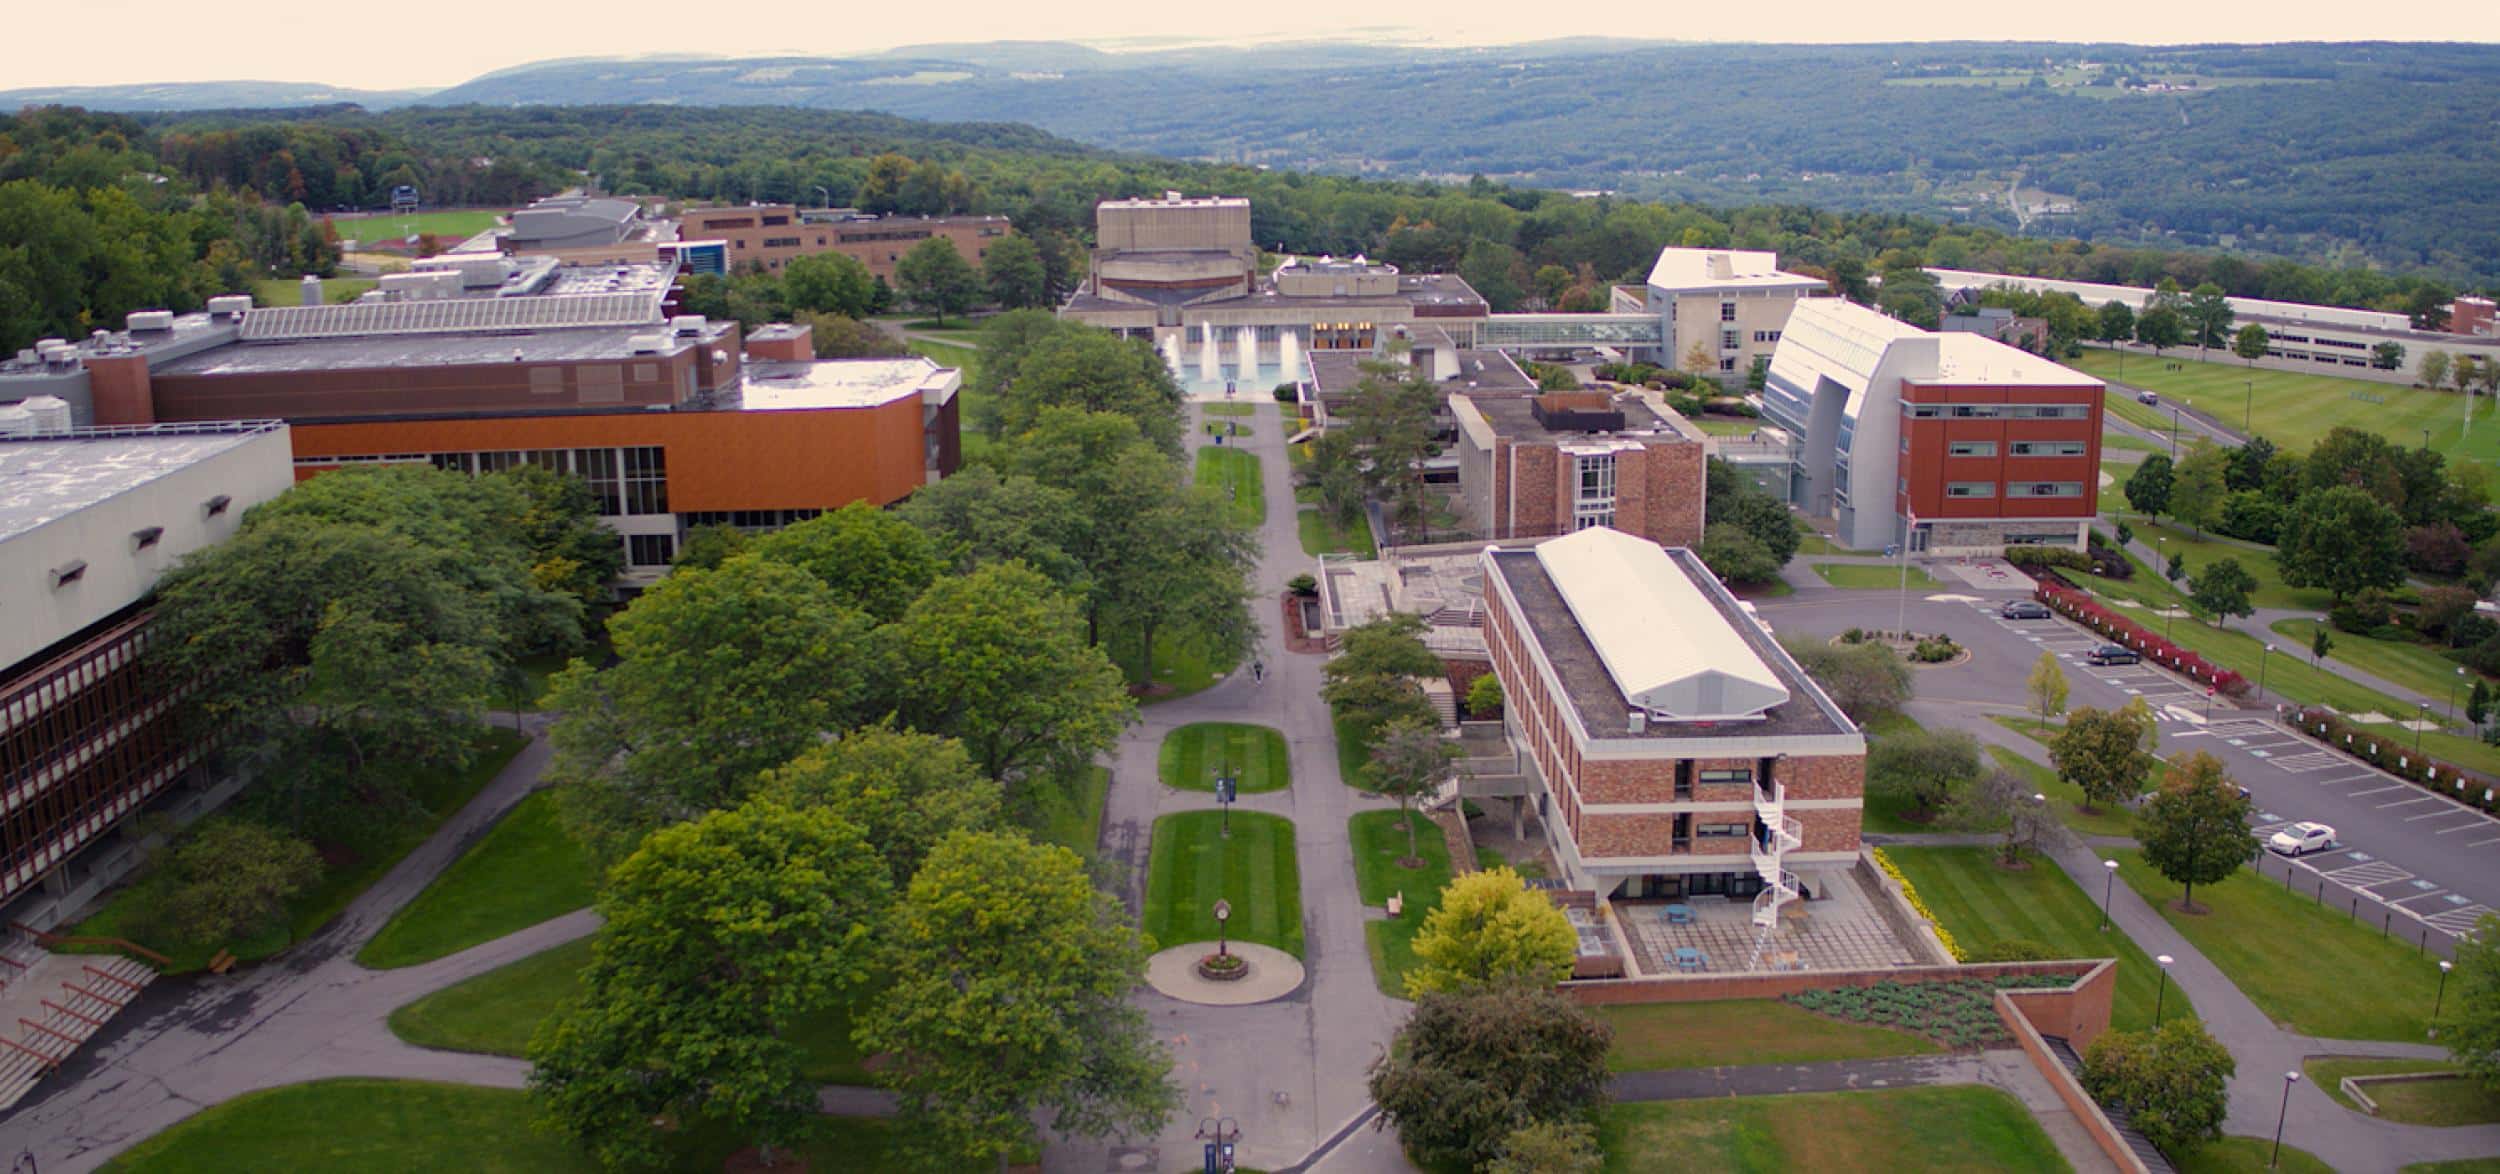 30th Annual Educational Technology Day hosted by Ithaca College